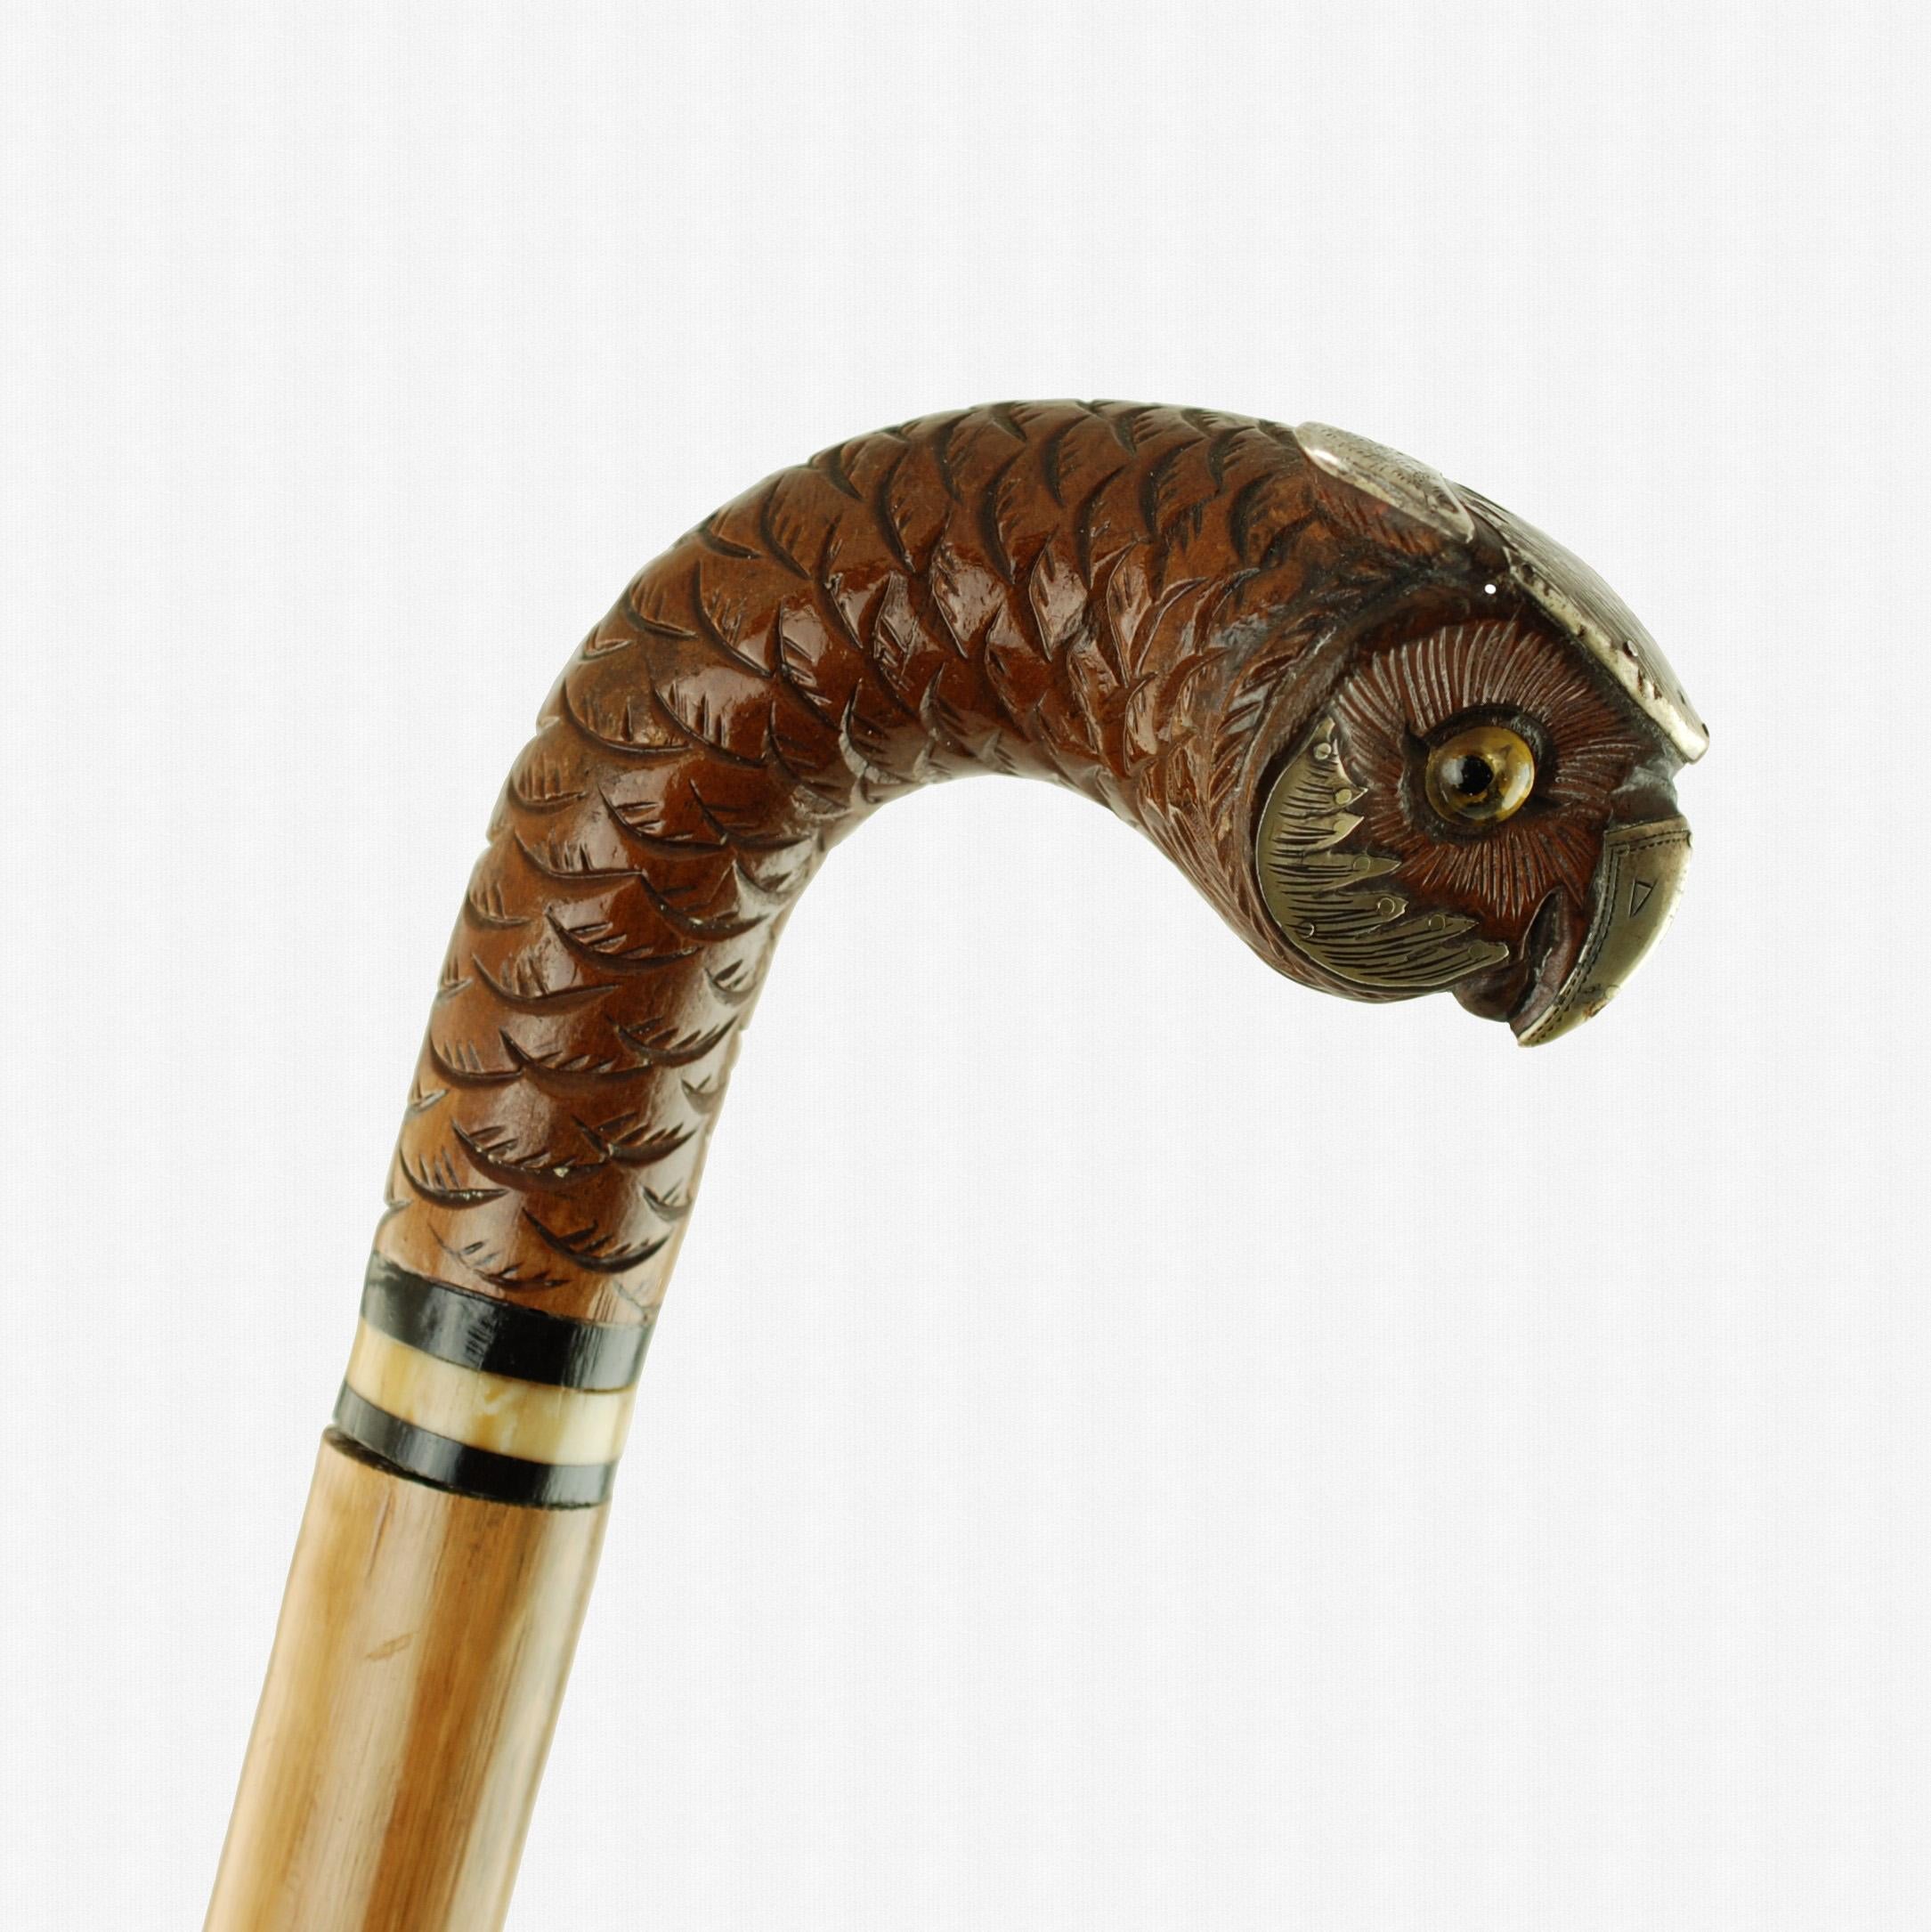 Edwardian Walking Stick Carved Wood Owl Head Handle Bearing Glass Eyes and Silver Accents